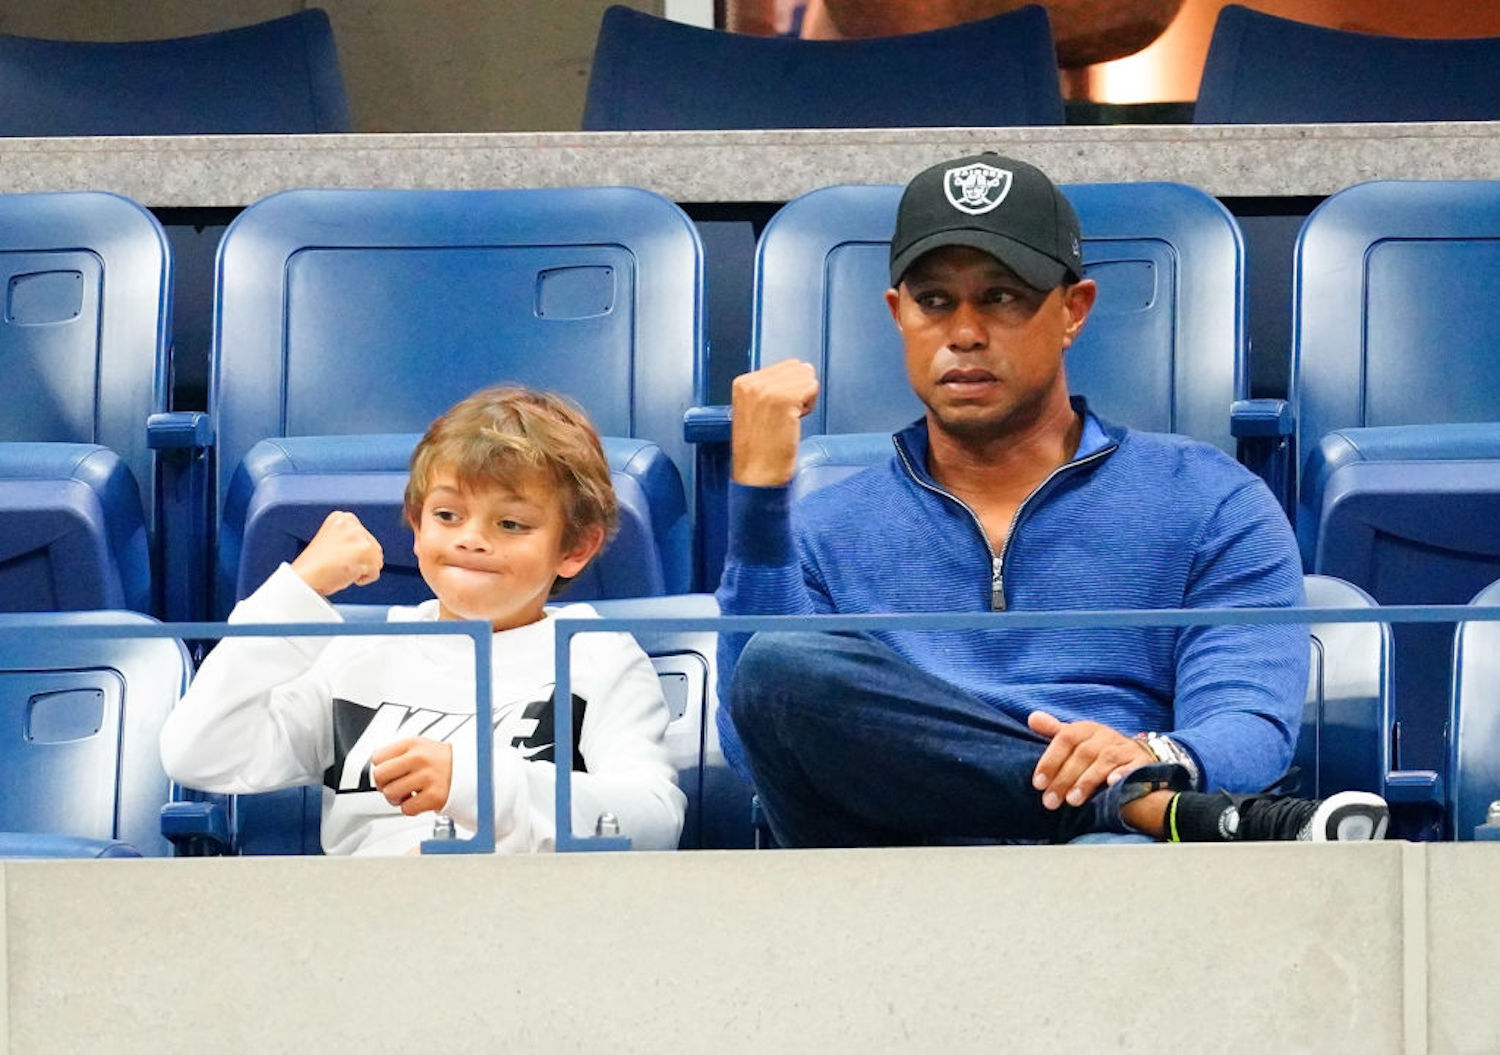 Tiger Woods' son, Charlie, is already a talented golfer at 11 years old, and the father-son duo will be teaming up on the course soon.